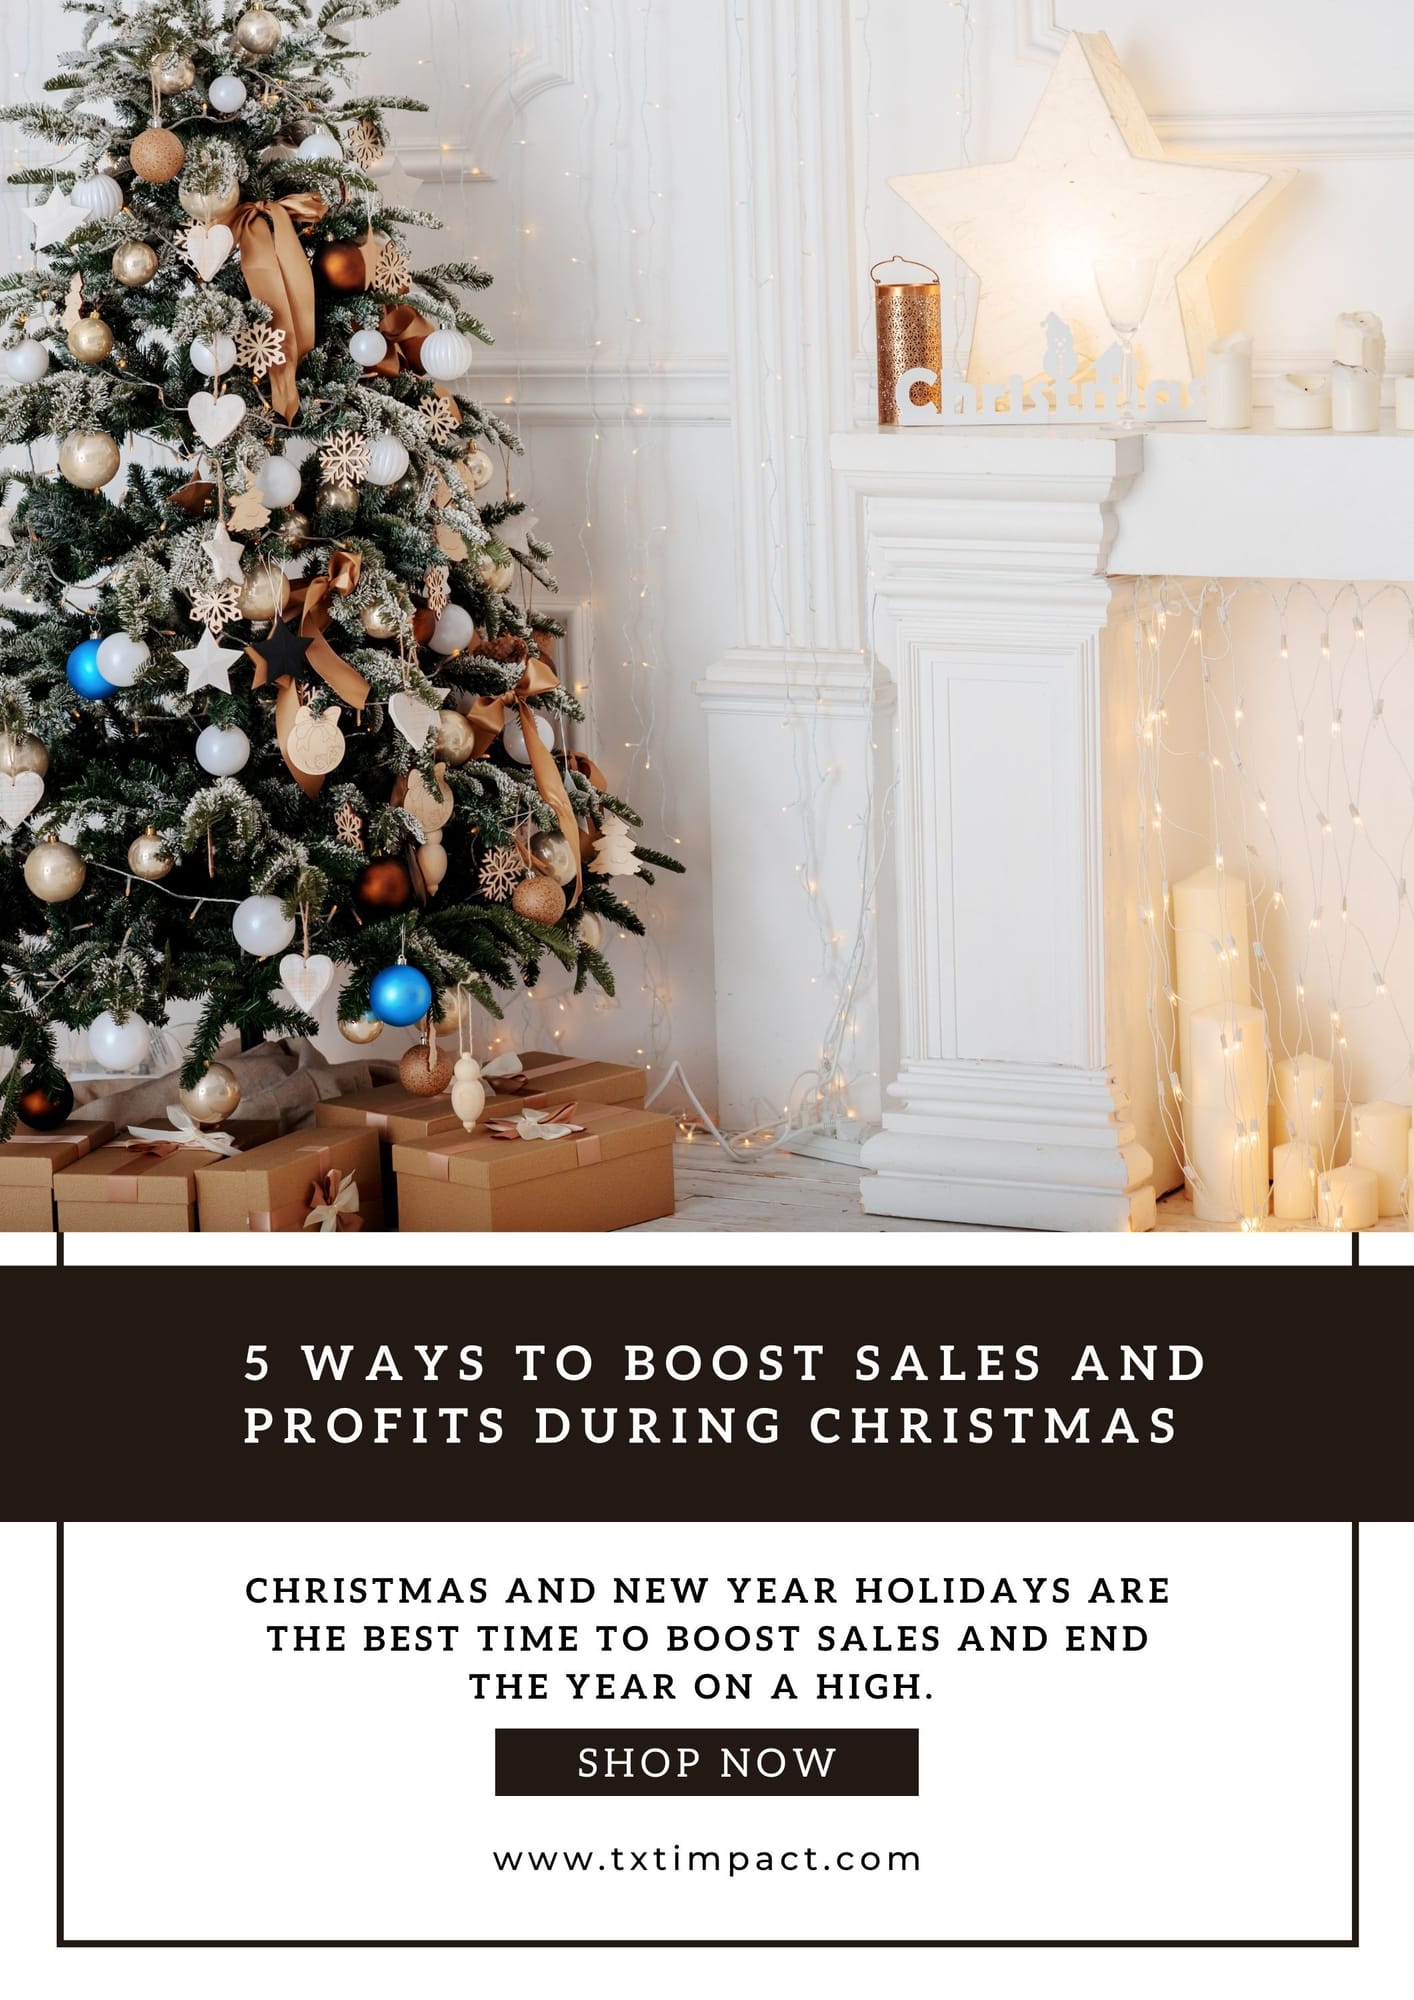 5 Ways to Boost Sales and Profits During Christmas      .jpg